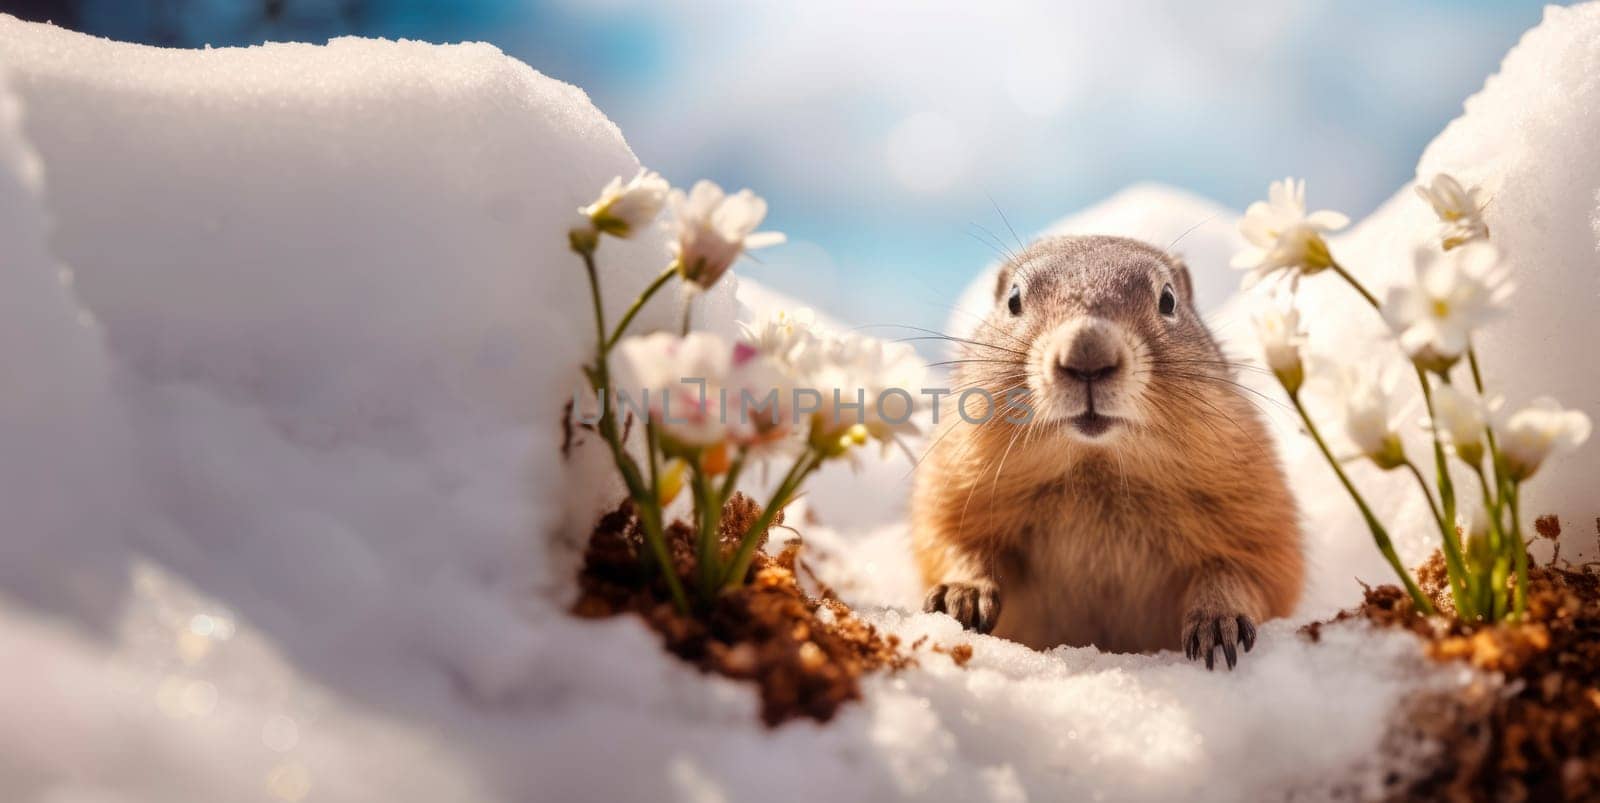 The groundhog came out of his hole. by Spirina